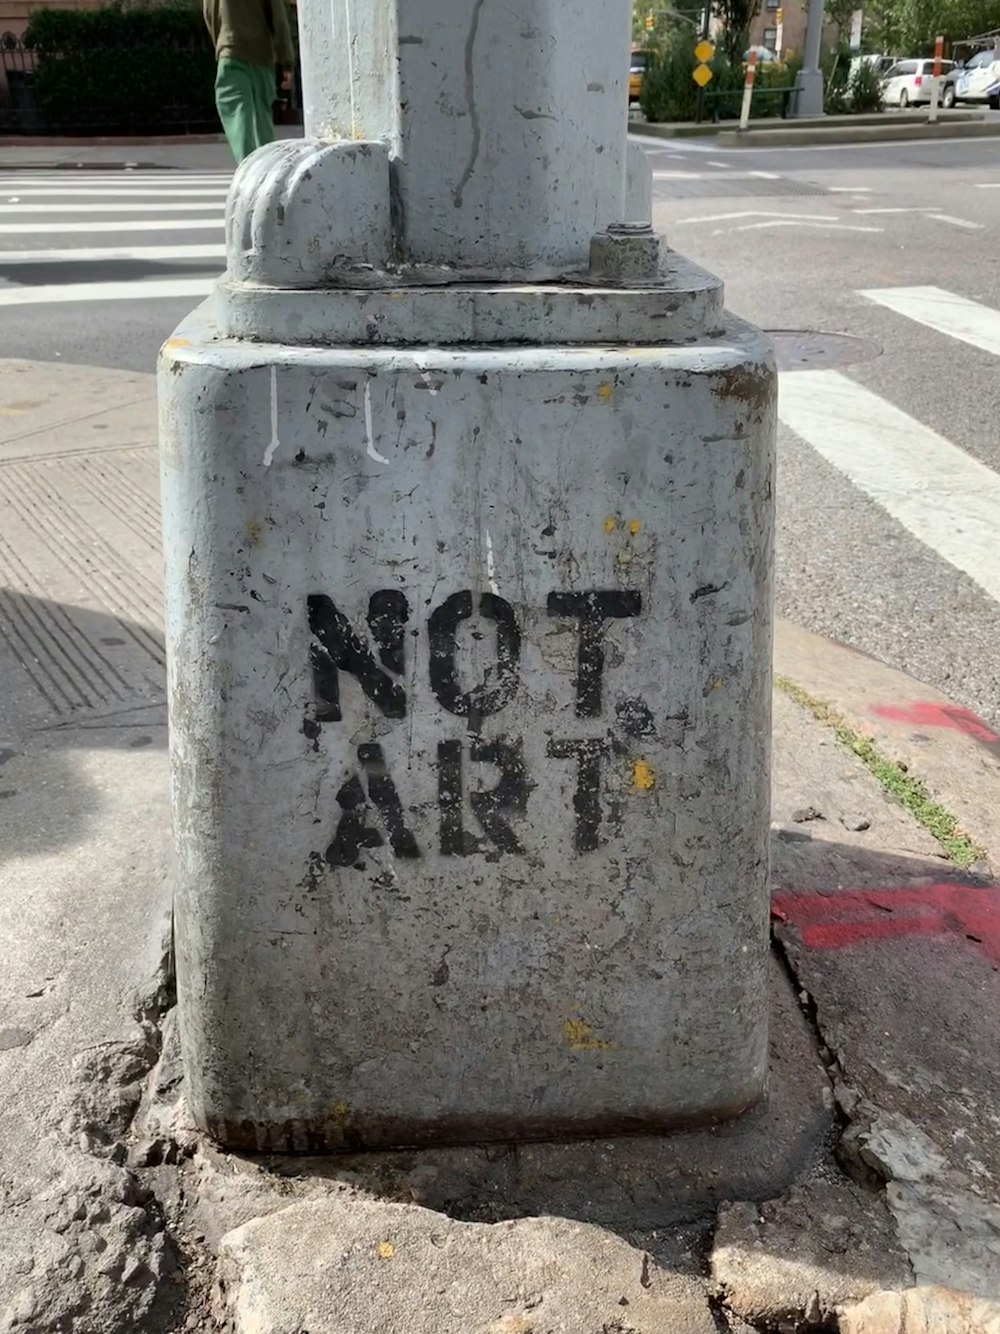 a fire hydrant that has been vandalized with graffiti